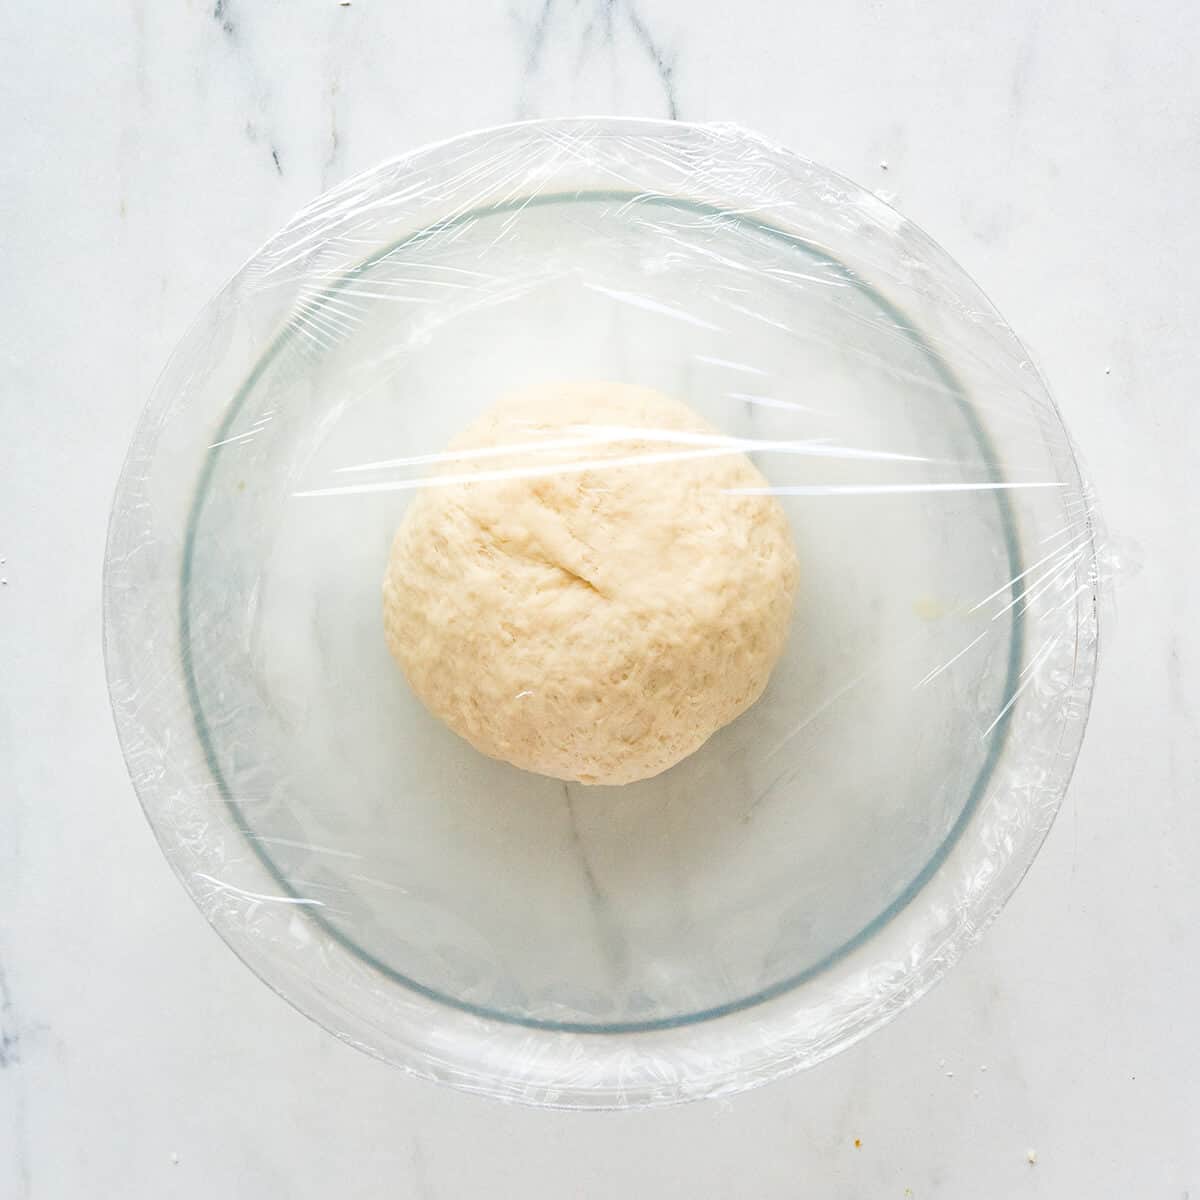 Dough ball in a mixing bowl covered with plastic wrap.